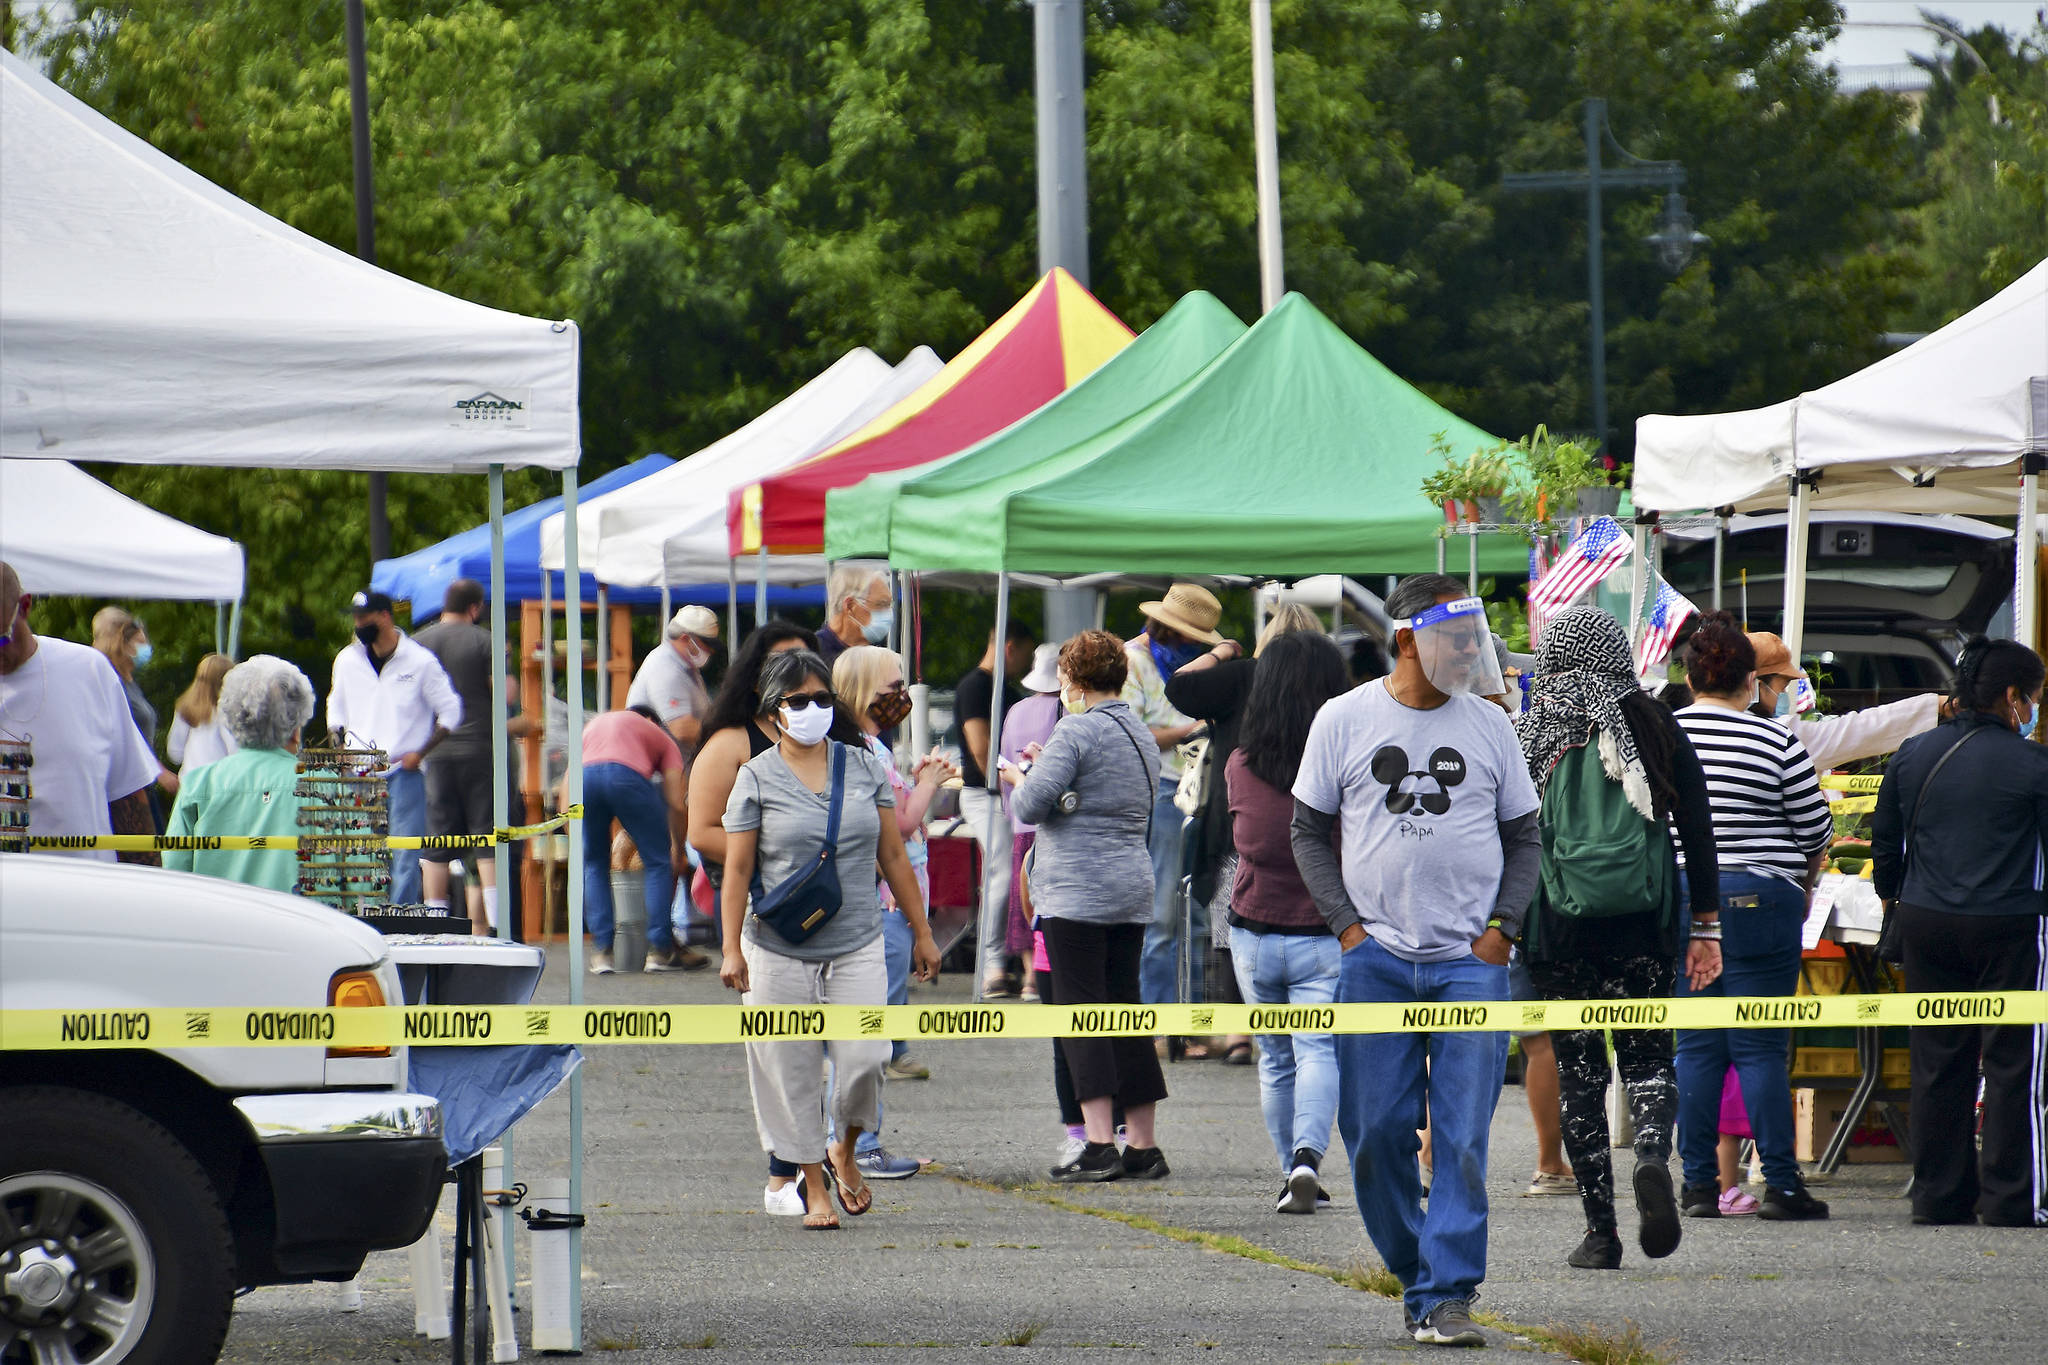 Photo courtesy of Bruce Honda
The Federal Way Farmers Market runs Saturdays at the corner of Pacific Highway South and South 324th Street.